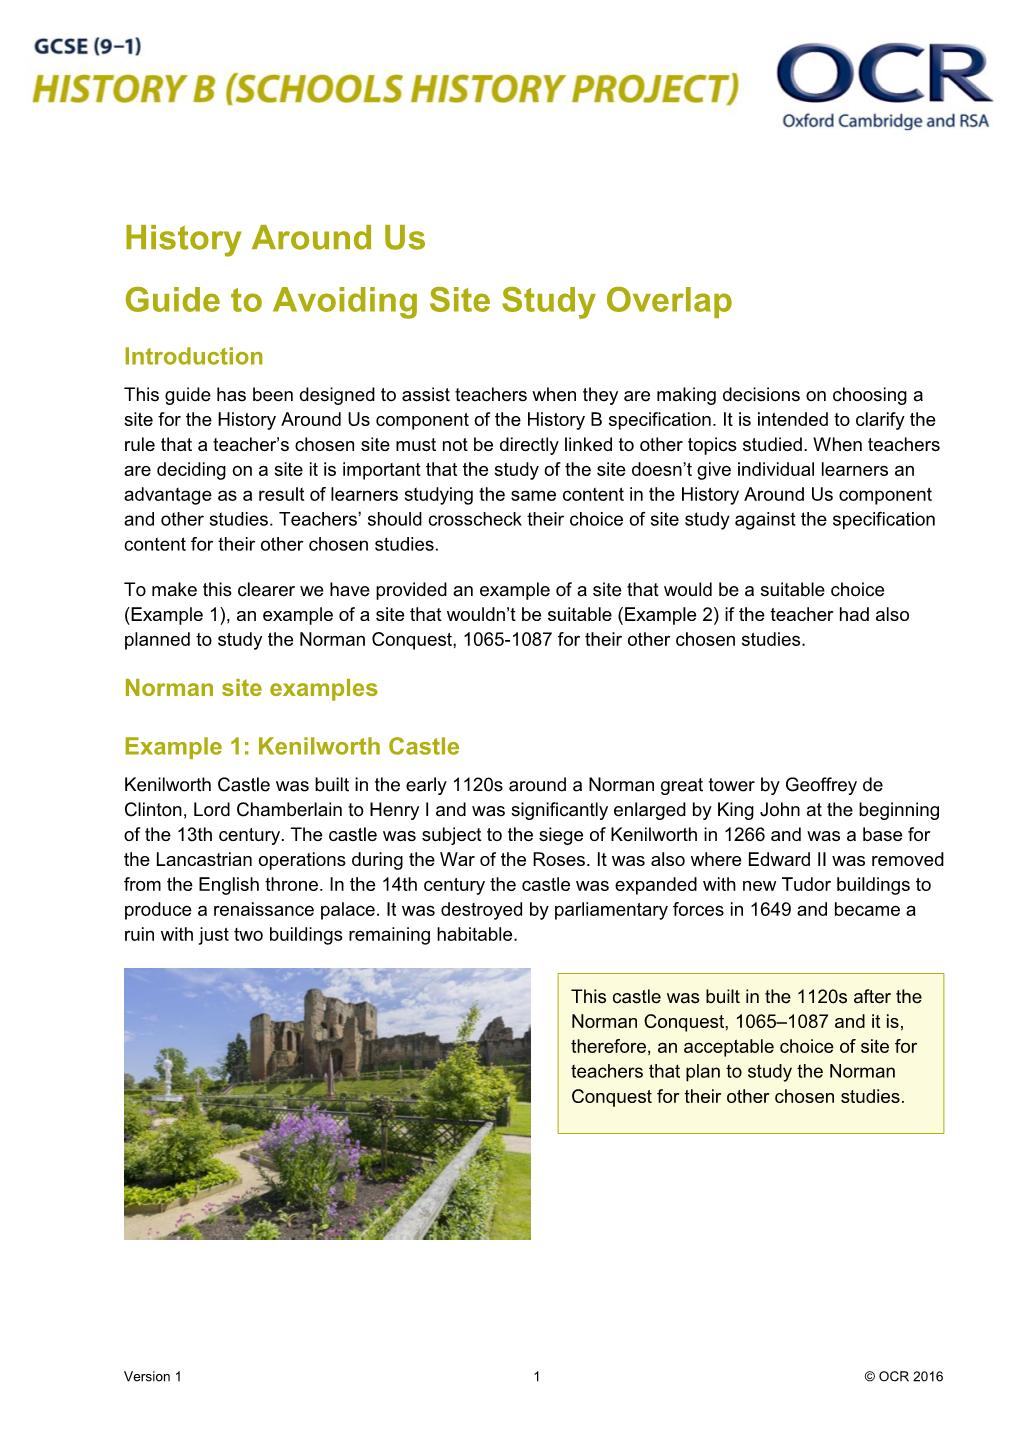 History Around Us Guide to Avoiding Site Study Overlap